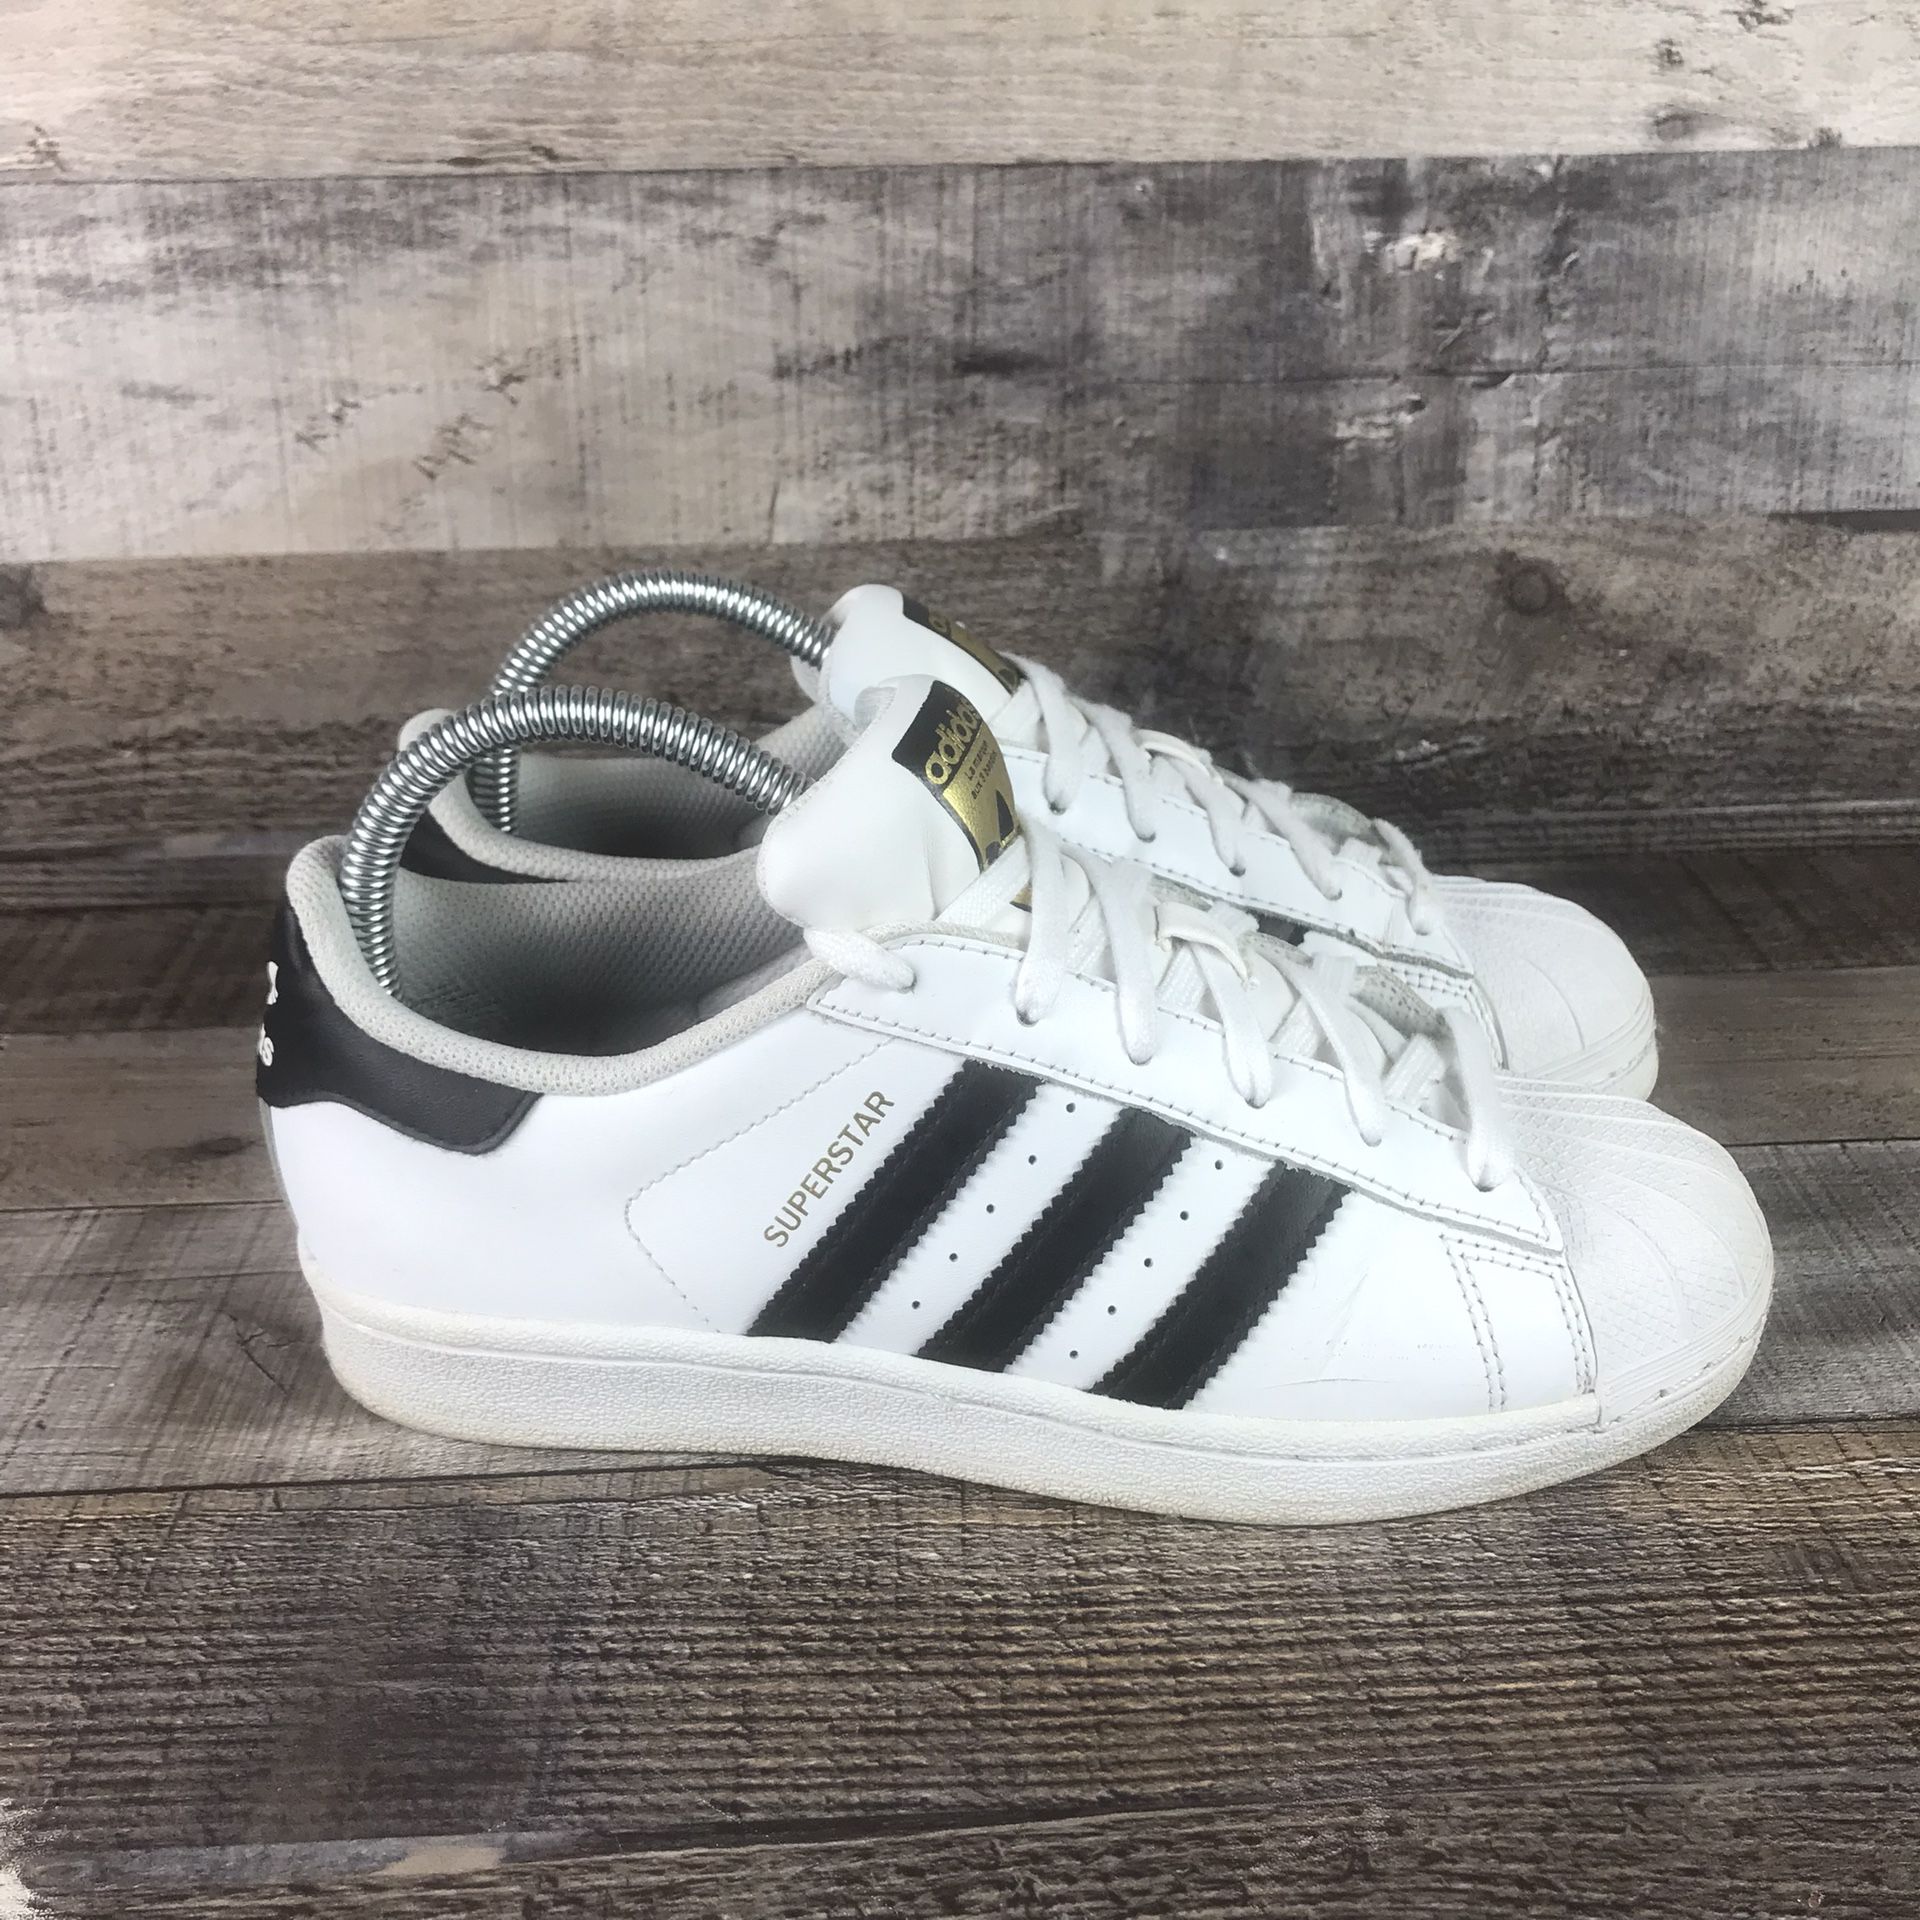 Adidas Superstar J Black White Shell Toes Sneaker Shoes Size 5.5 Youth/Wm’s  7